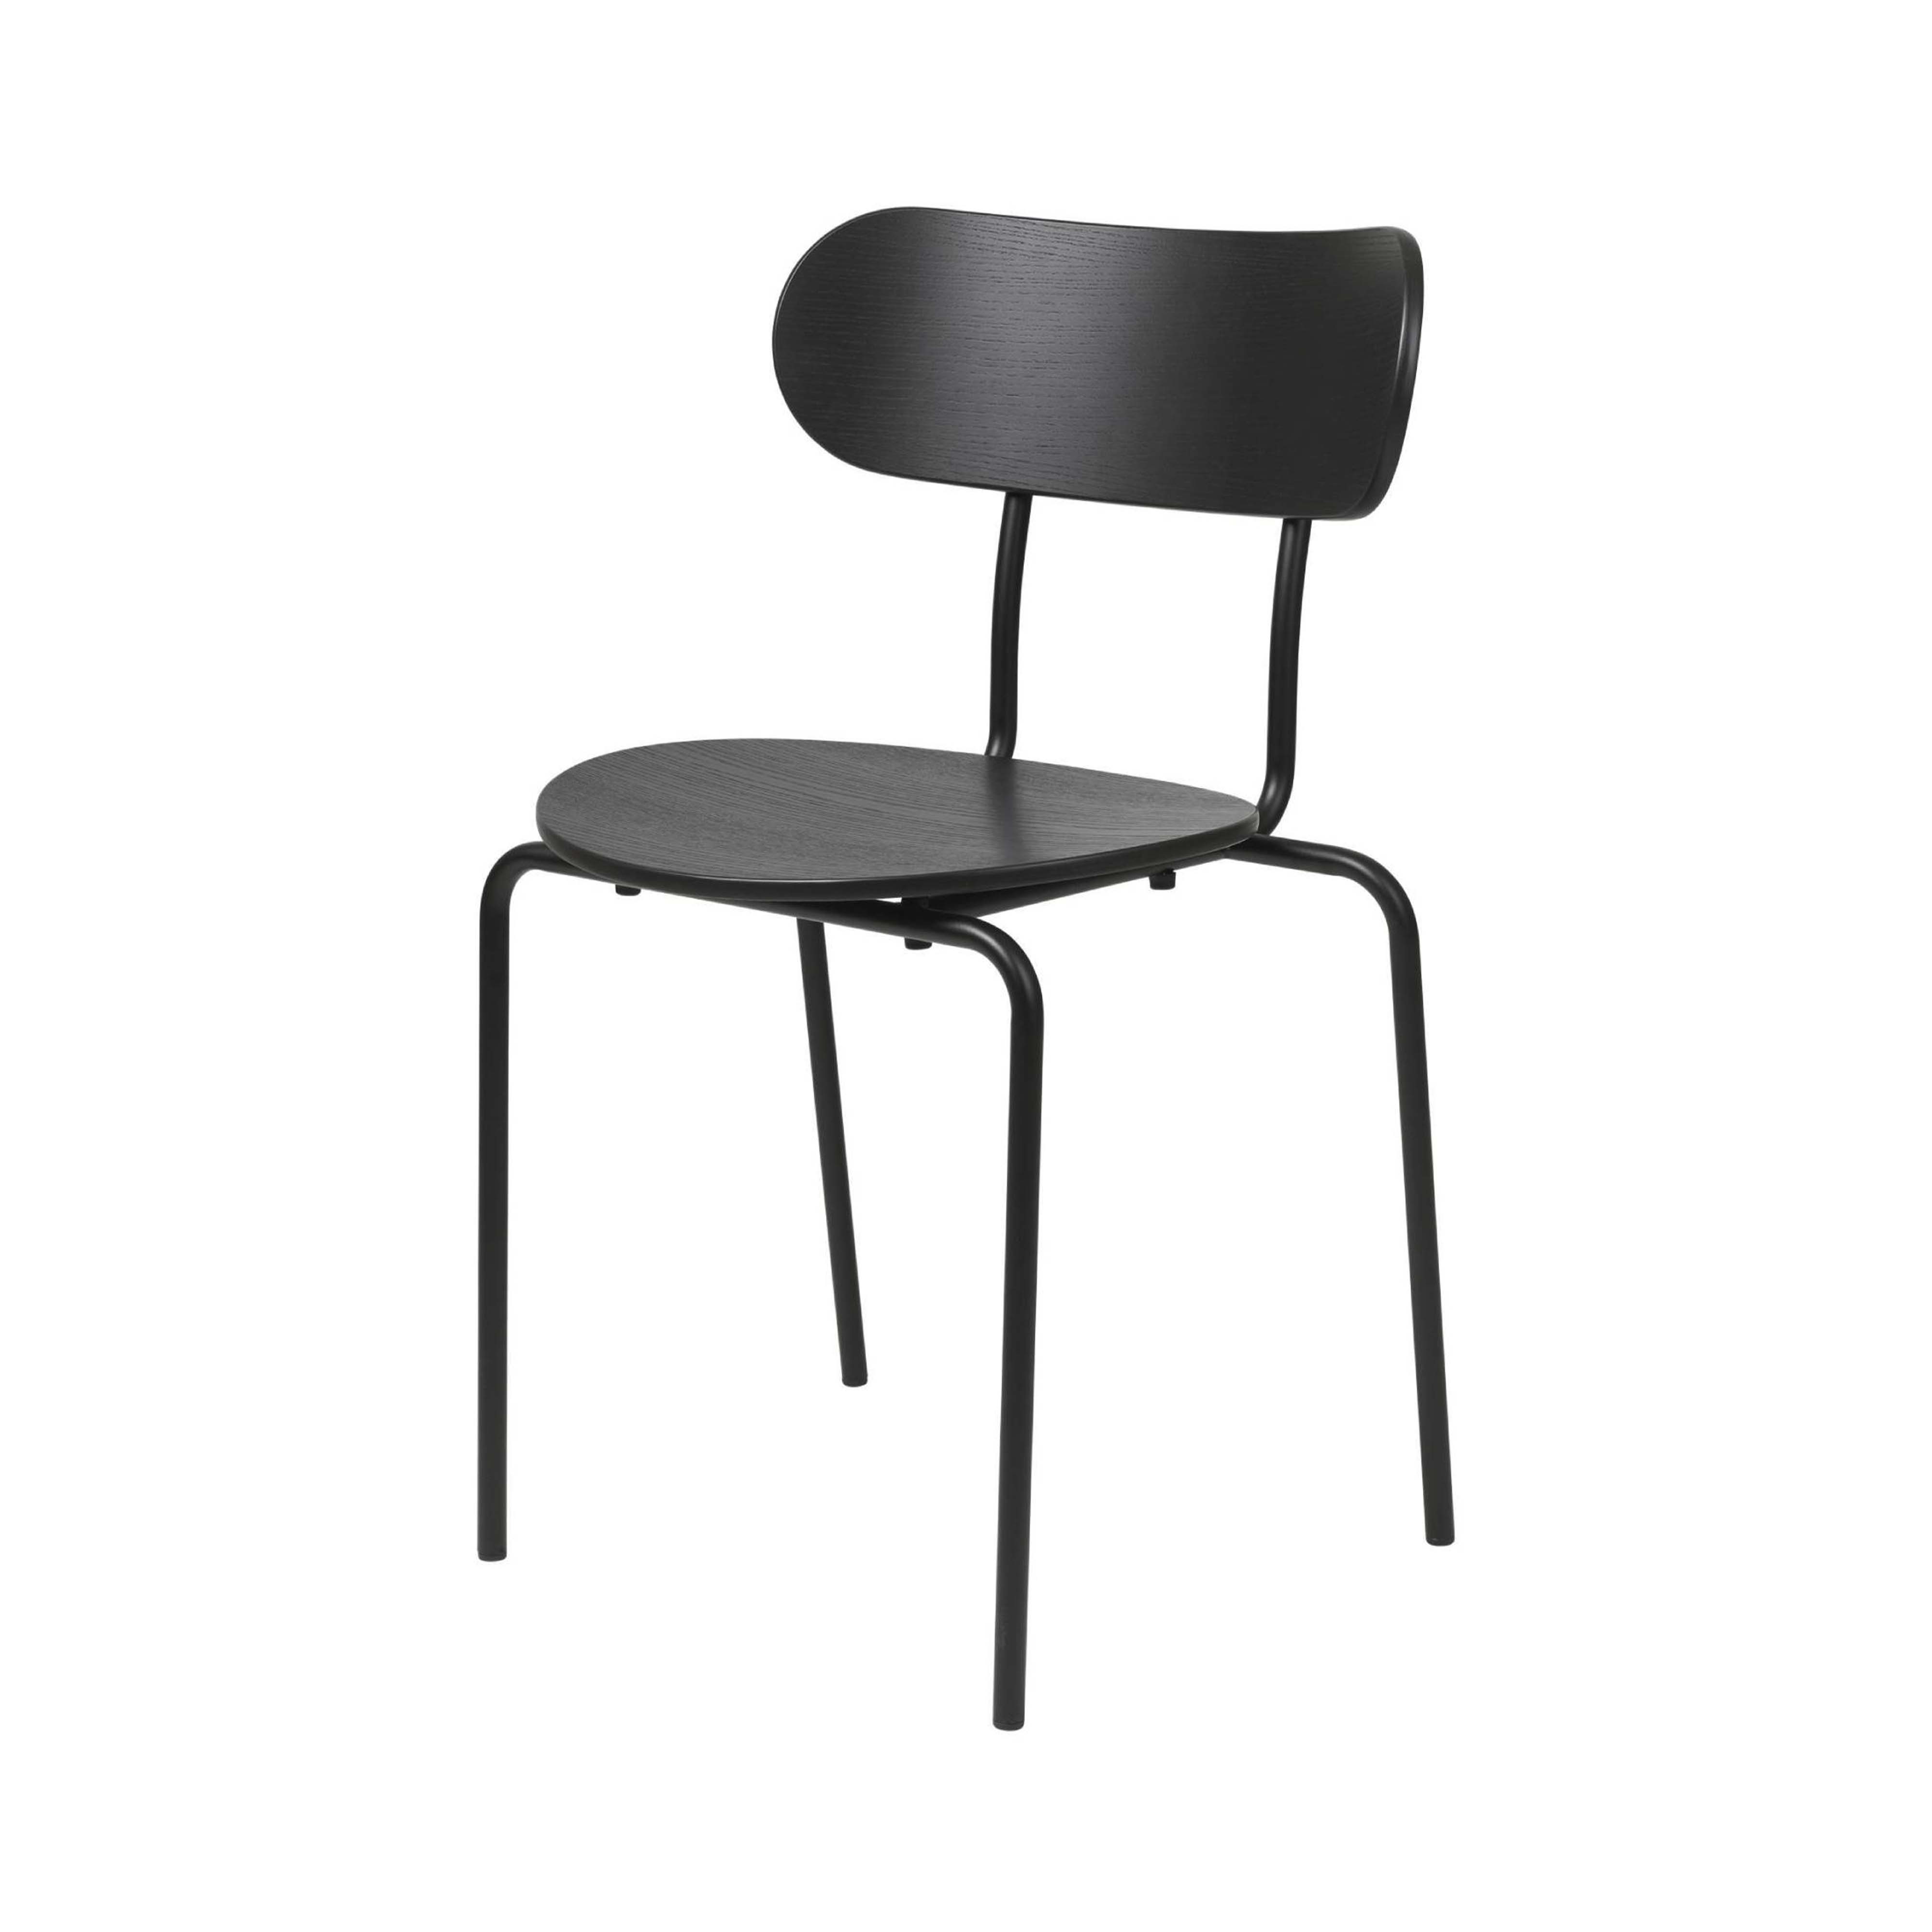 Coco Chair Stacking: Black Ash